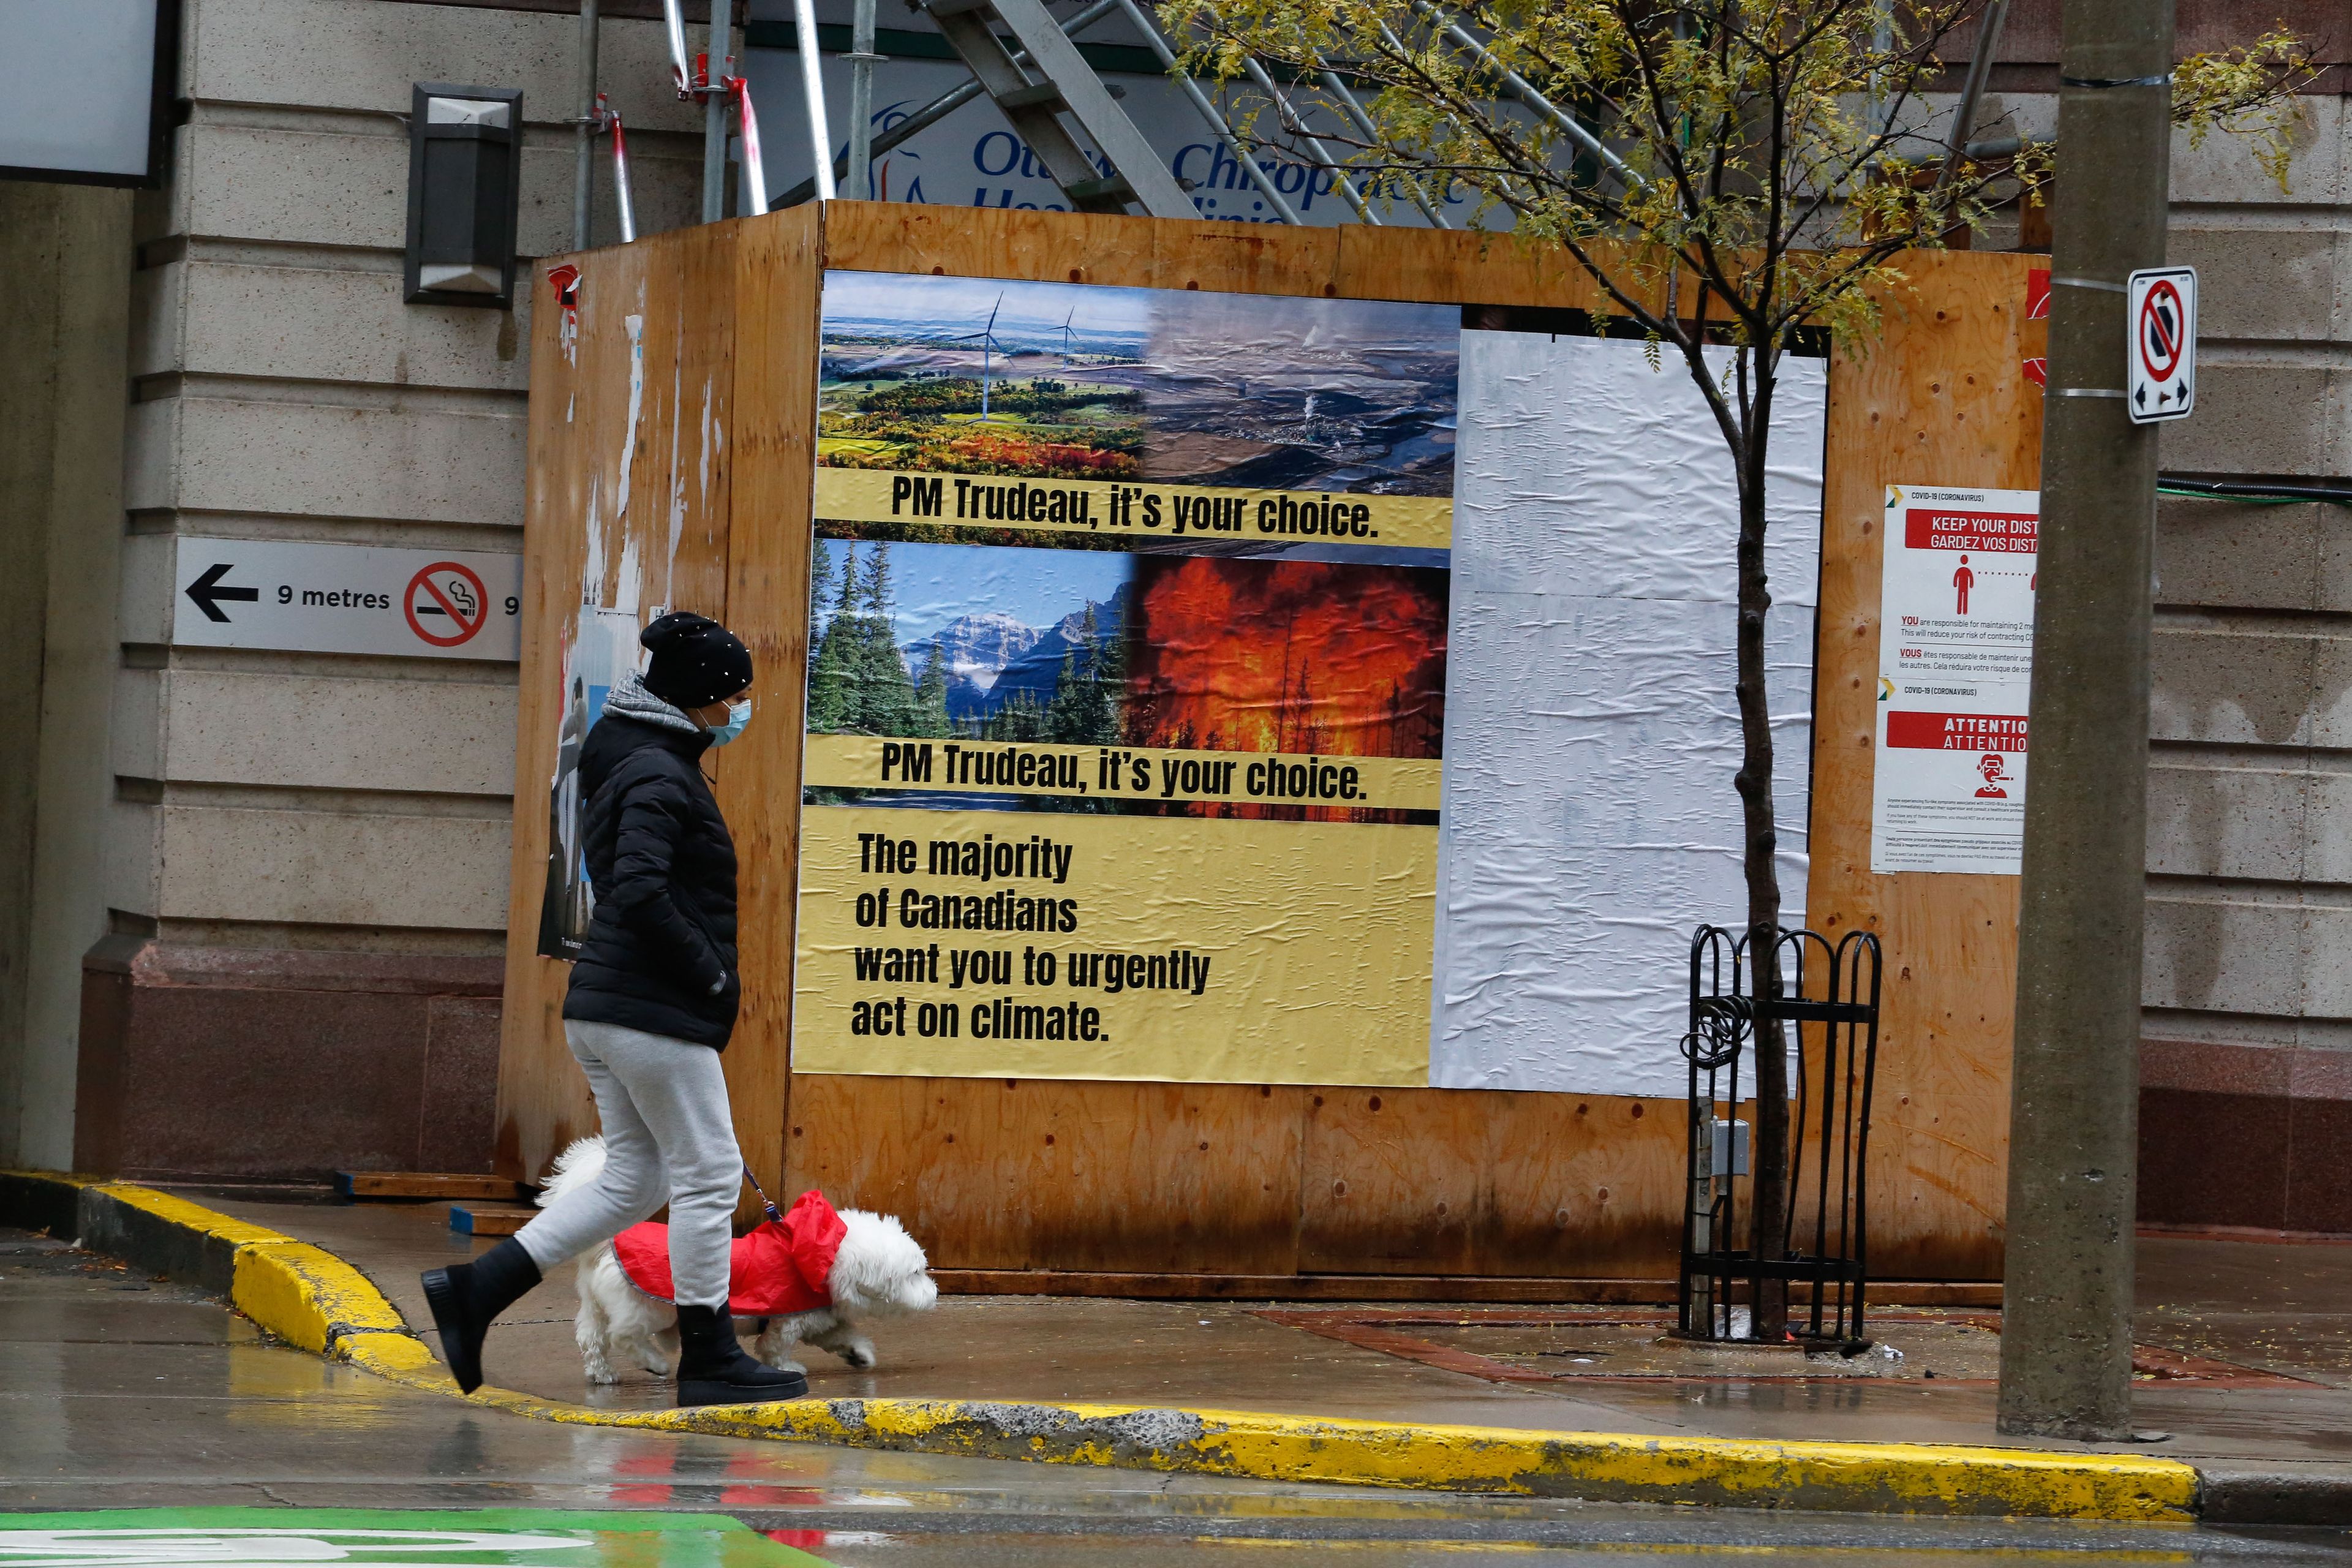 A pedestrian walks by a poster installation in Ottawa on Oct. 31, 2021 (CP)